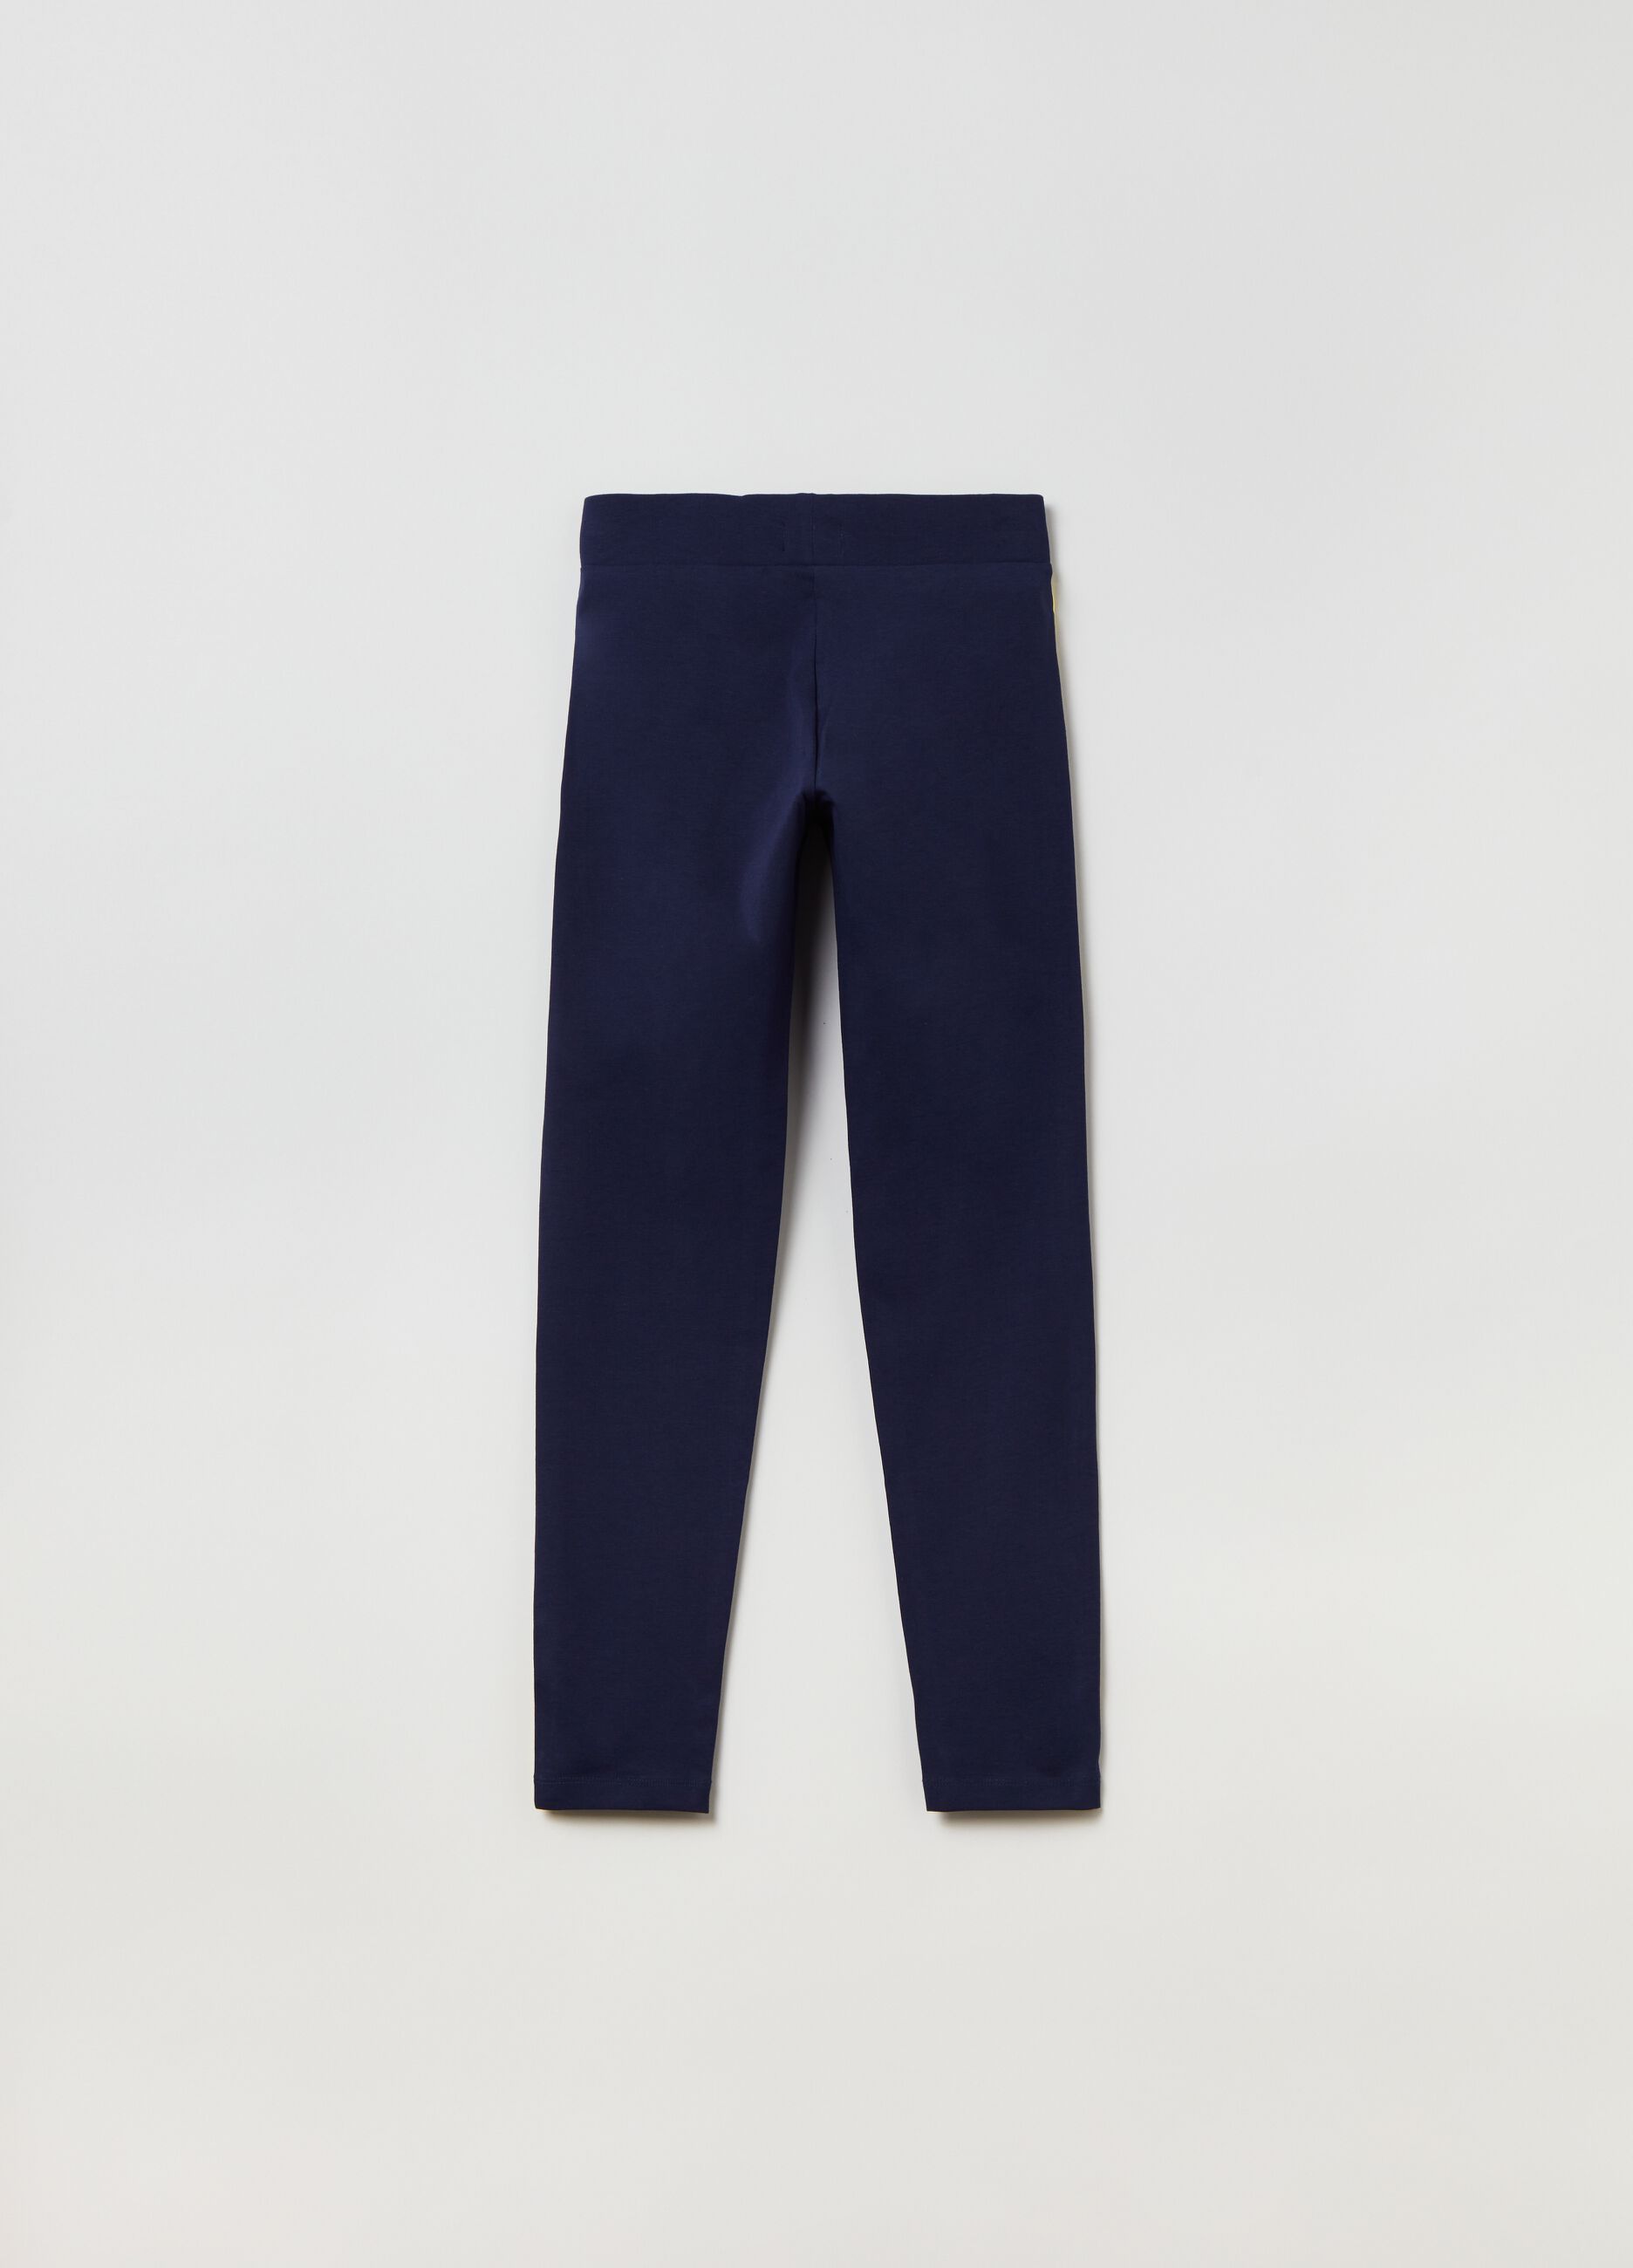 Stretch cotton leggings with side bands